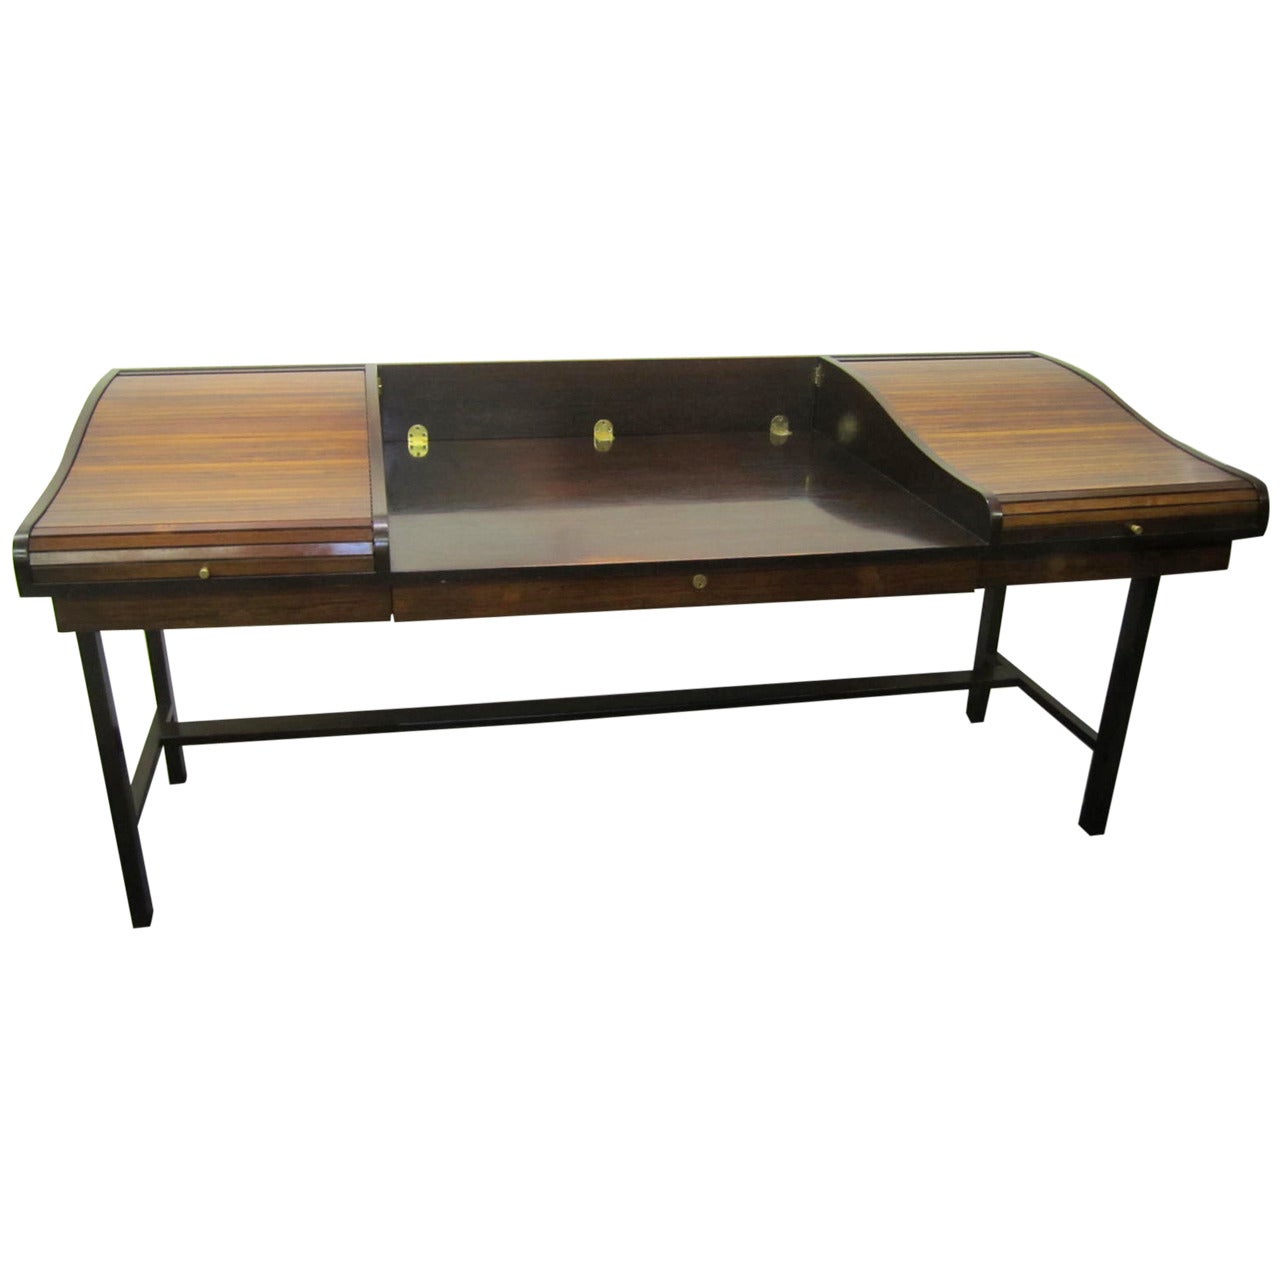 Excellent Rosewood Roll Top Desk by Edward Wormley for Dunbar Mid-Century Modern For Sale